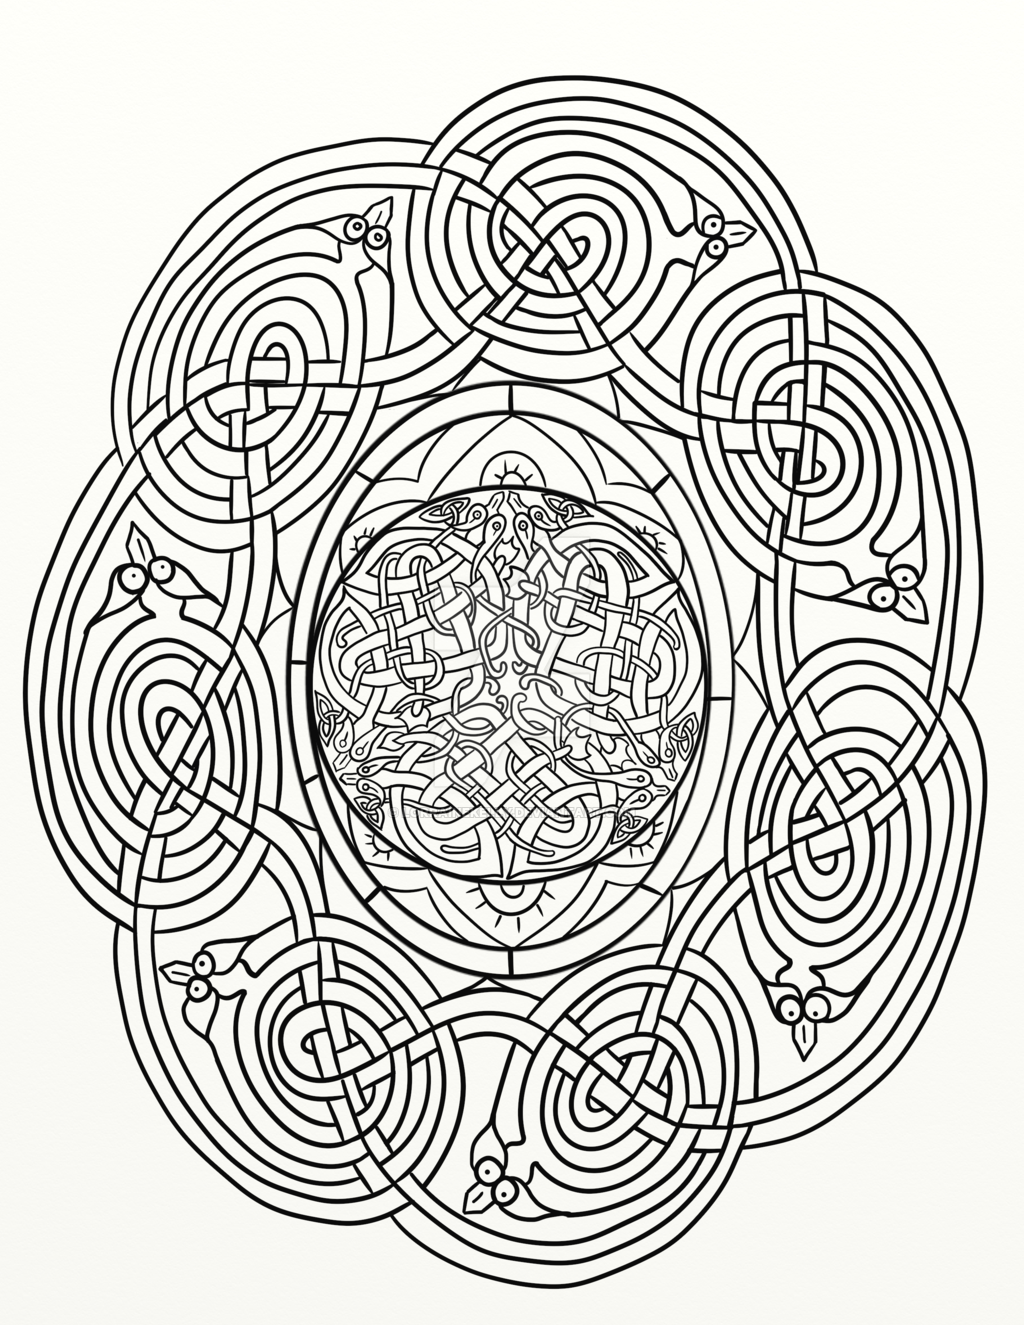 Mermaid in Celtic Knot Adult Coloring Page by LorraineKelly on ...